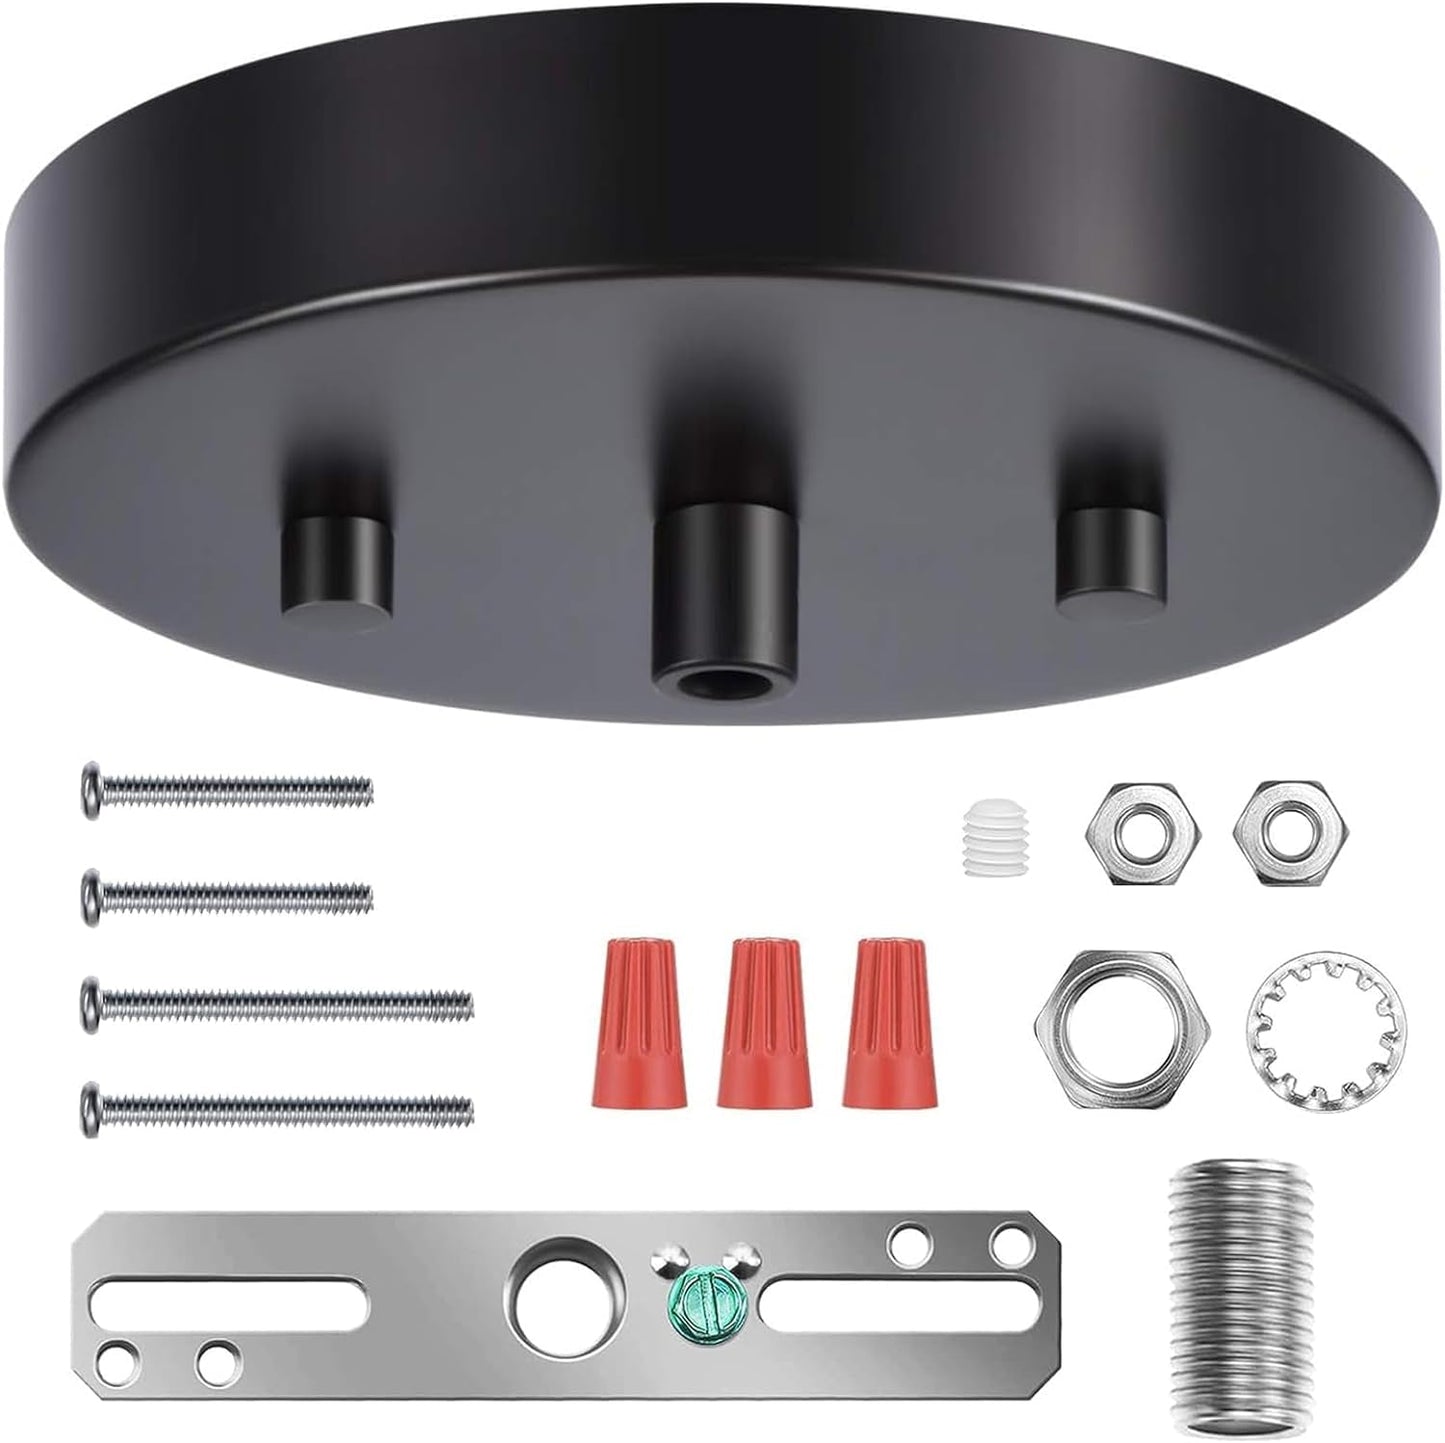 5.4'' Light Canopy Kit with Heavy Duty, Replacement Cover Plate with Mounting Hardware for Chandelier, Pendant Light, Swag Light, Ceiling Fan, Flower Basket or DIY Projects (Chrome)